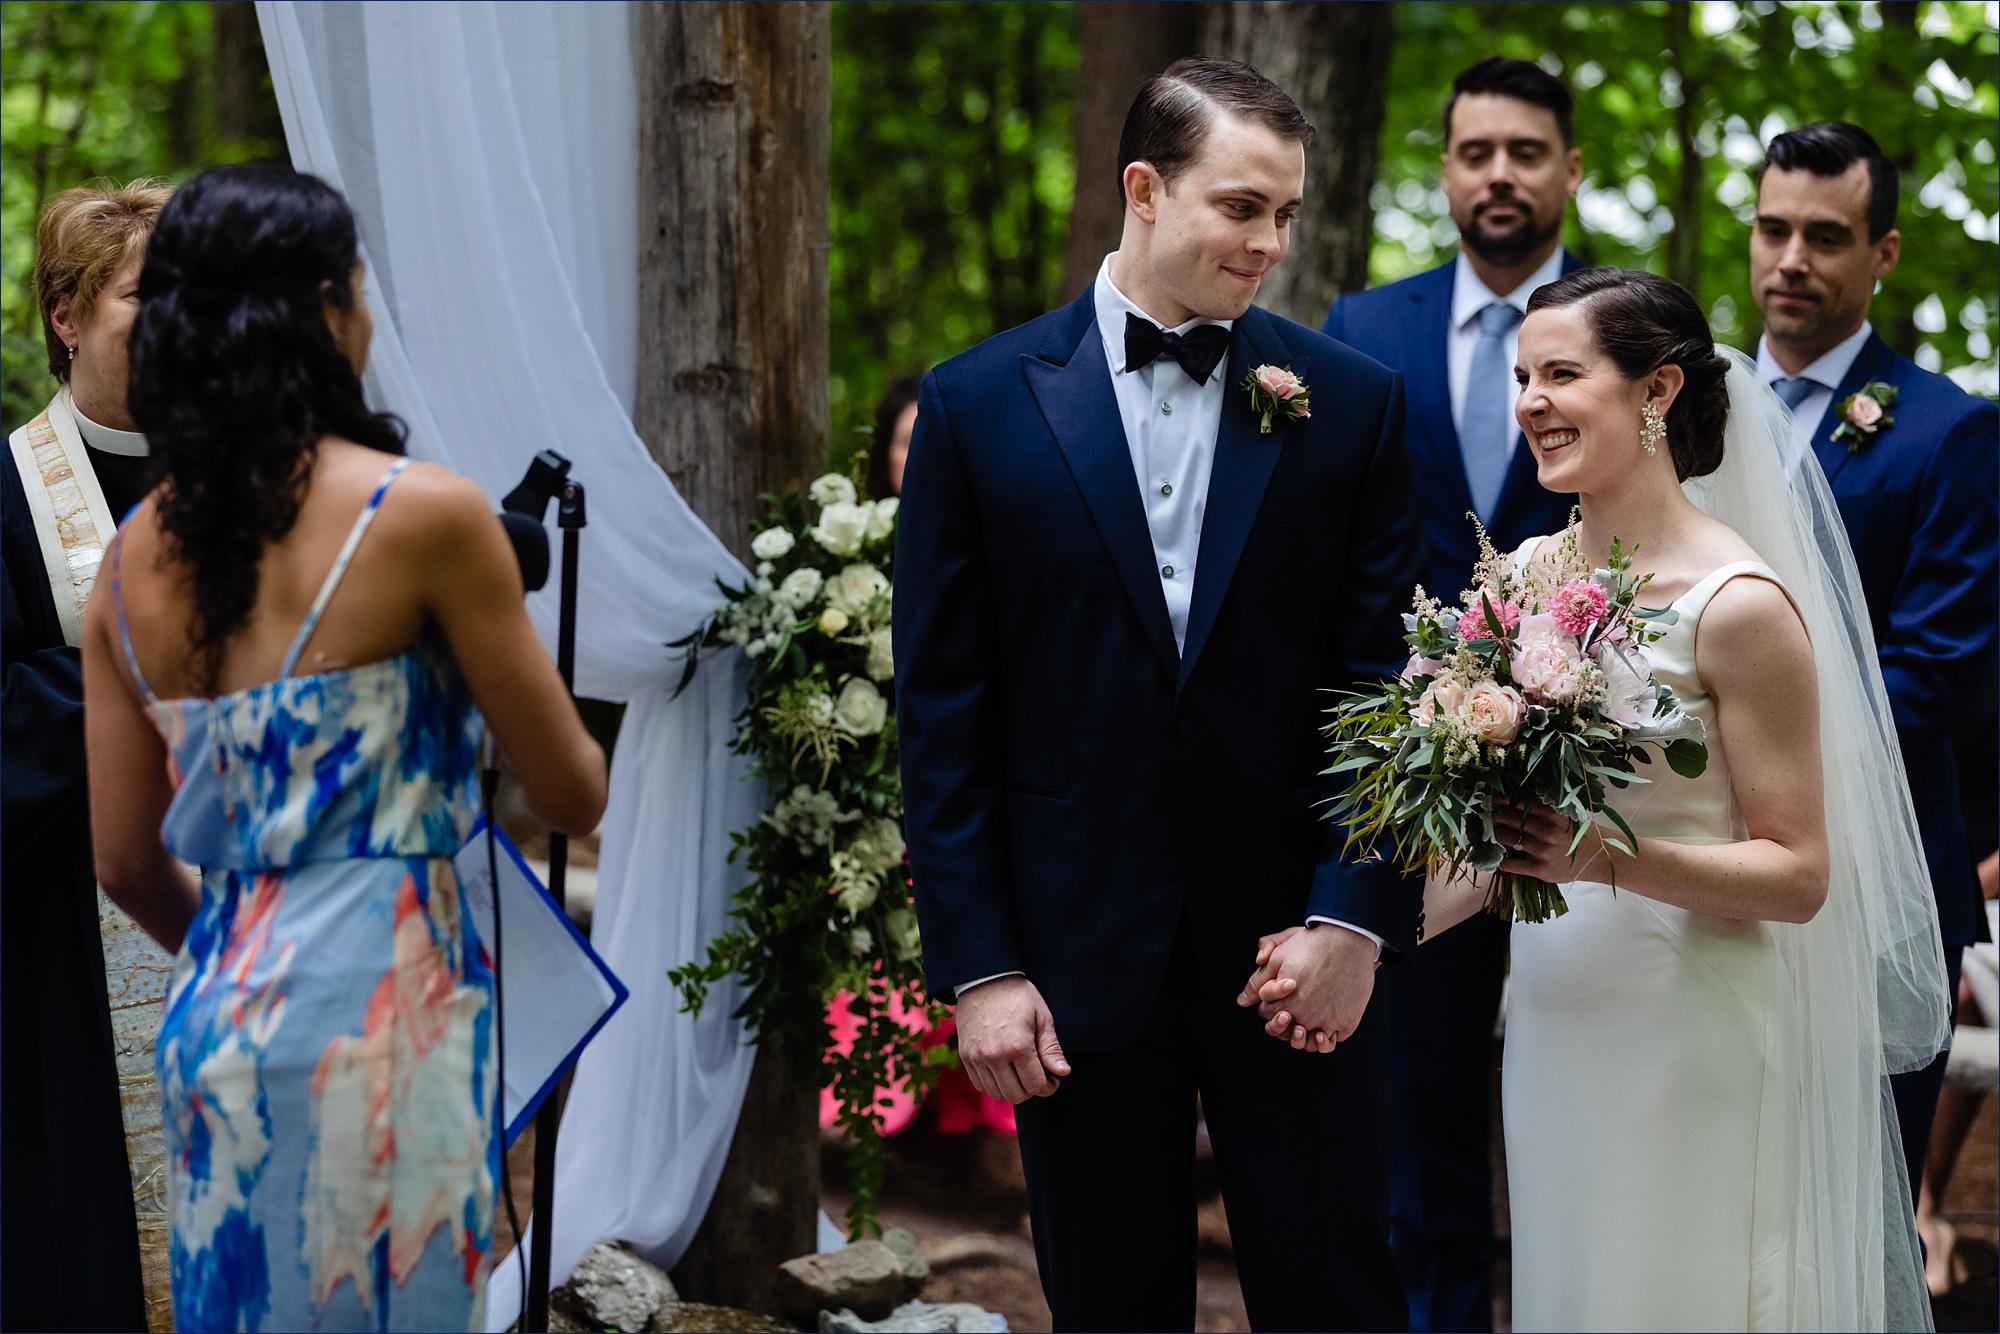 The groom smiles at the bride as they listen to a reading at their outdoor wooded wedding in Maine